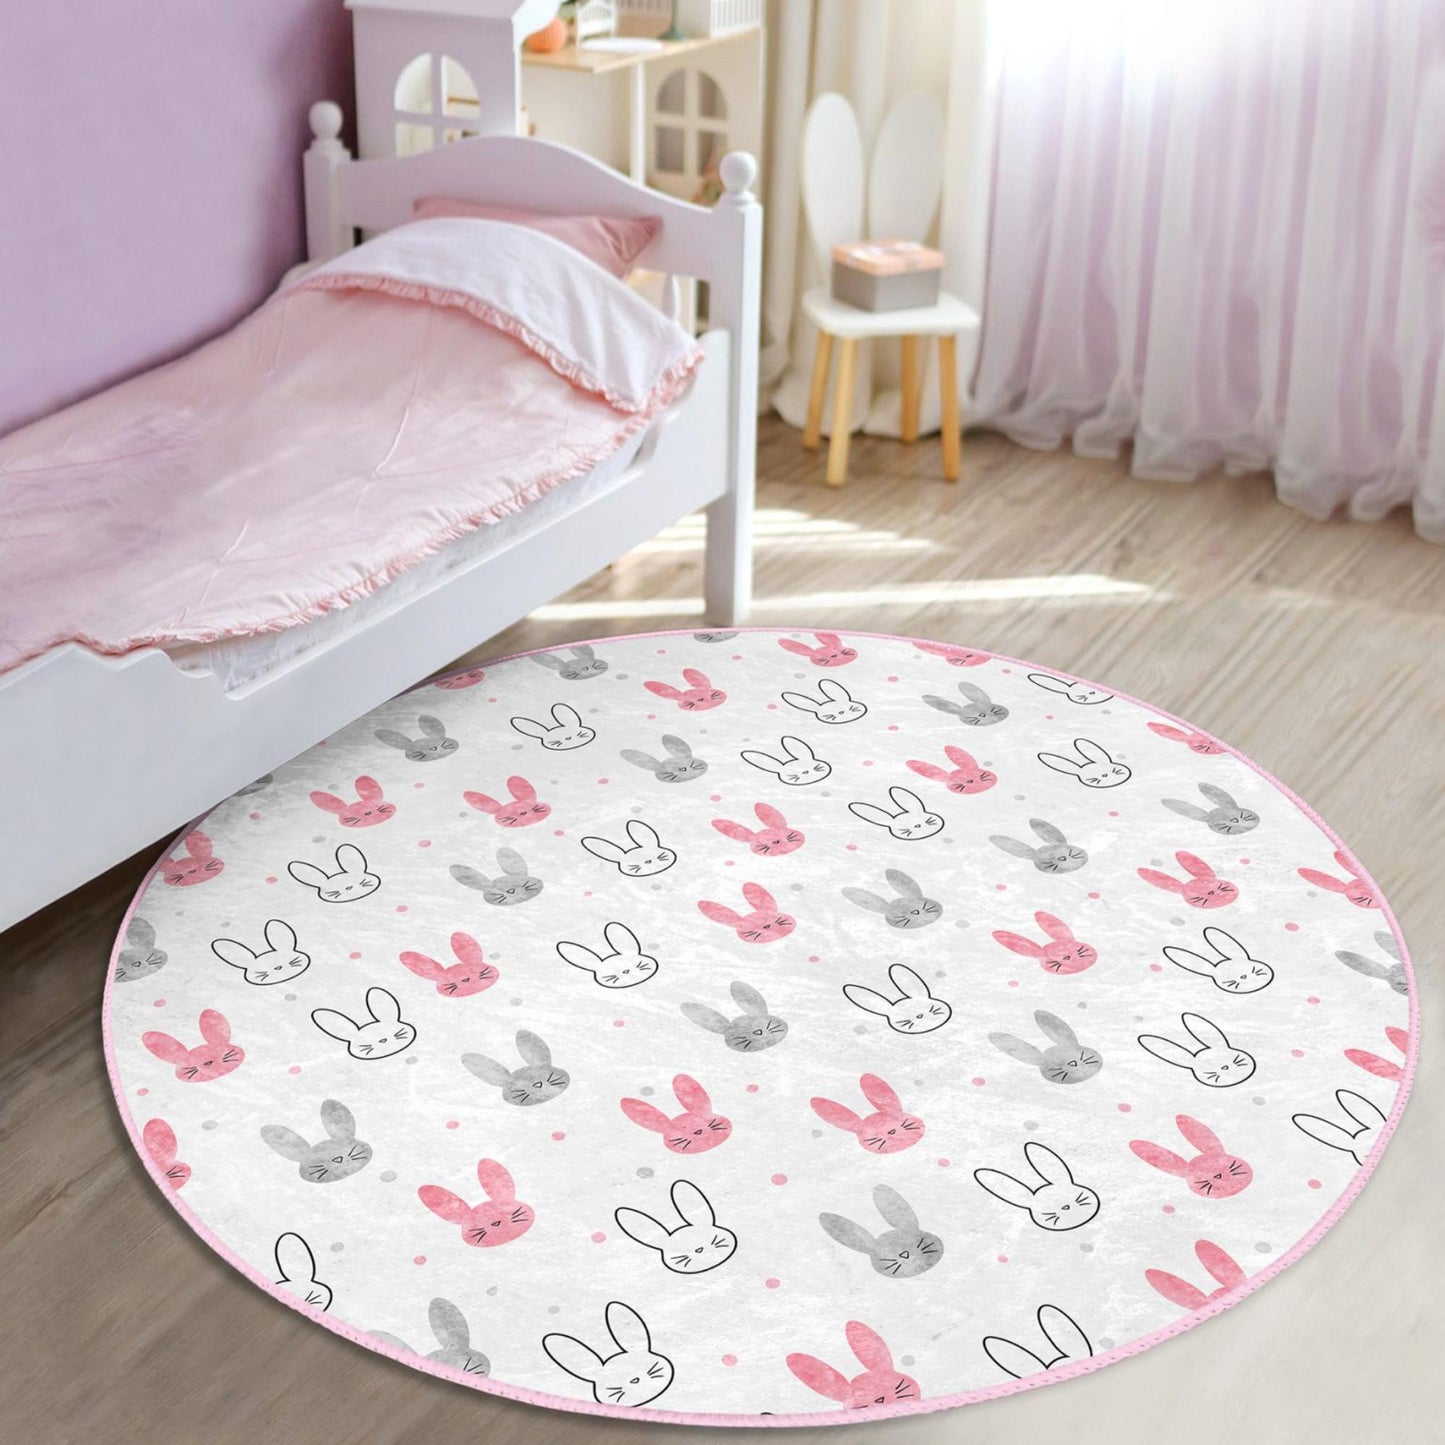 Cozy rabbit-patterned rug to add a playful touch to kids' bedrooms.